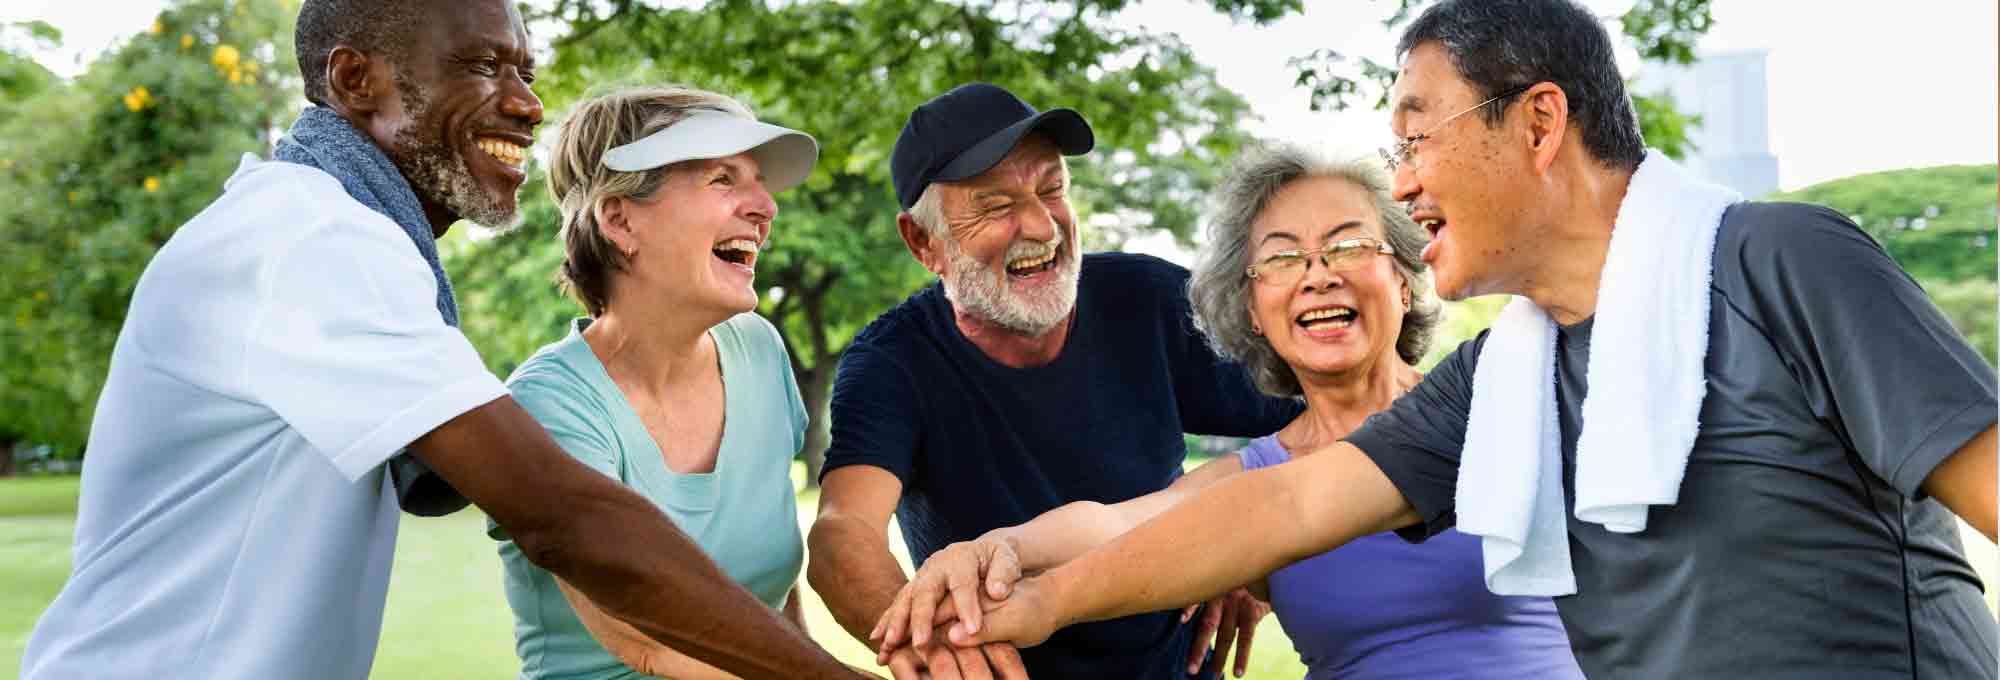 Photograph of five senior citizens enjoying time together in a park.